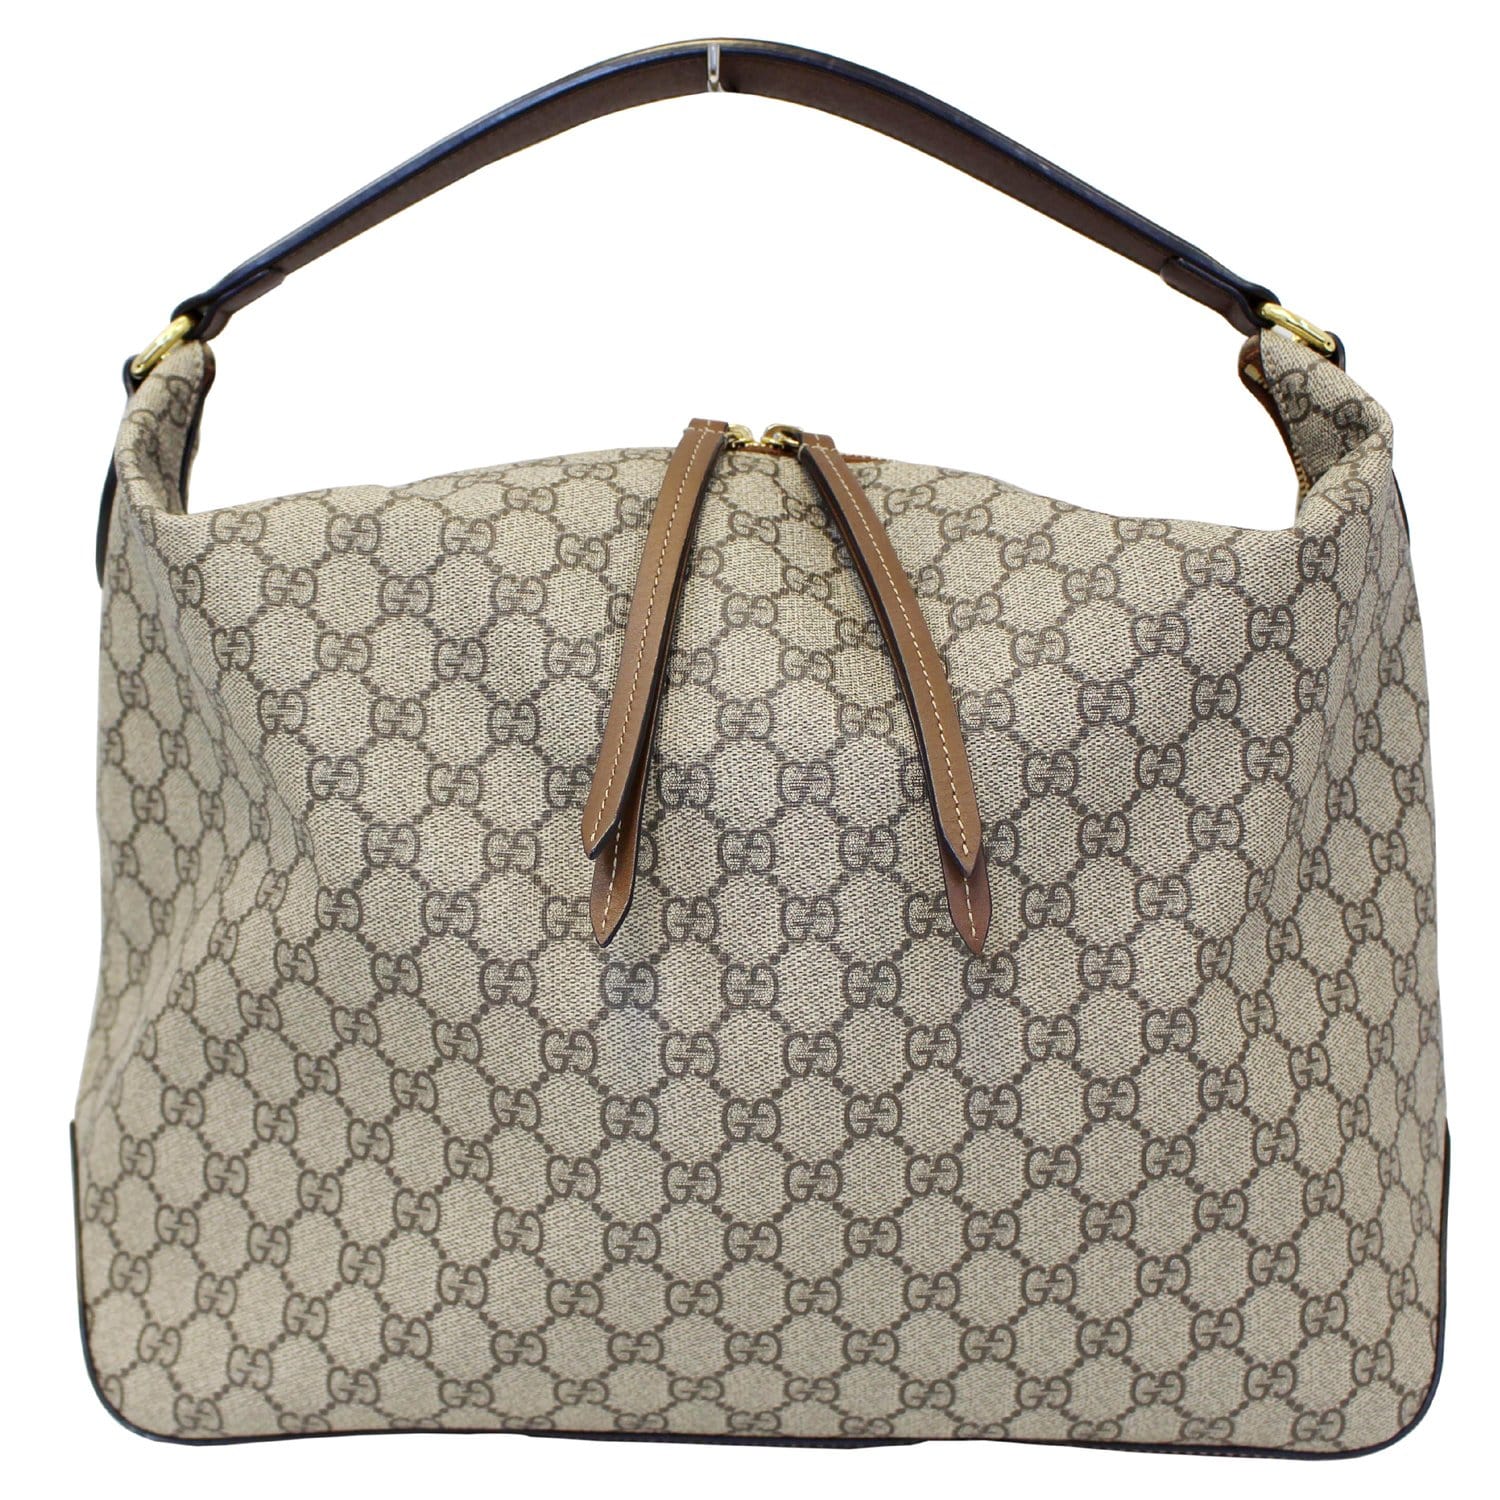 Gucci 70s tan/brown coated canvas & leather monogram hobo bag